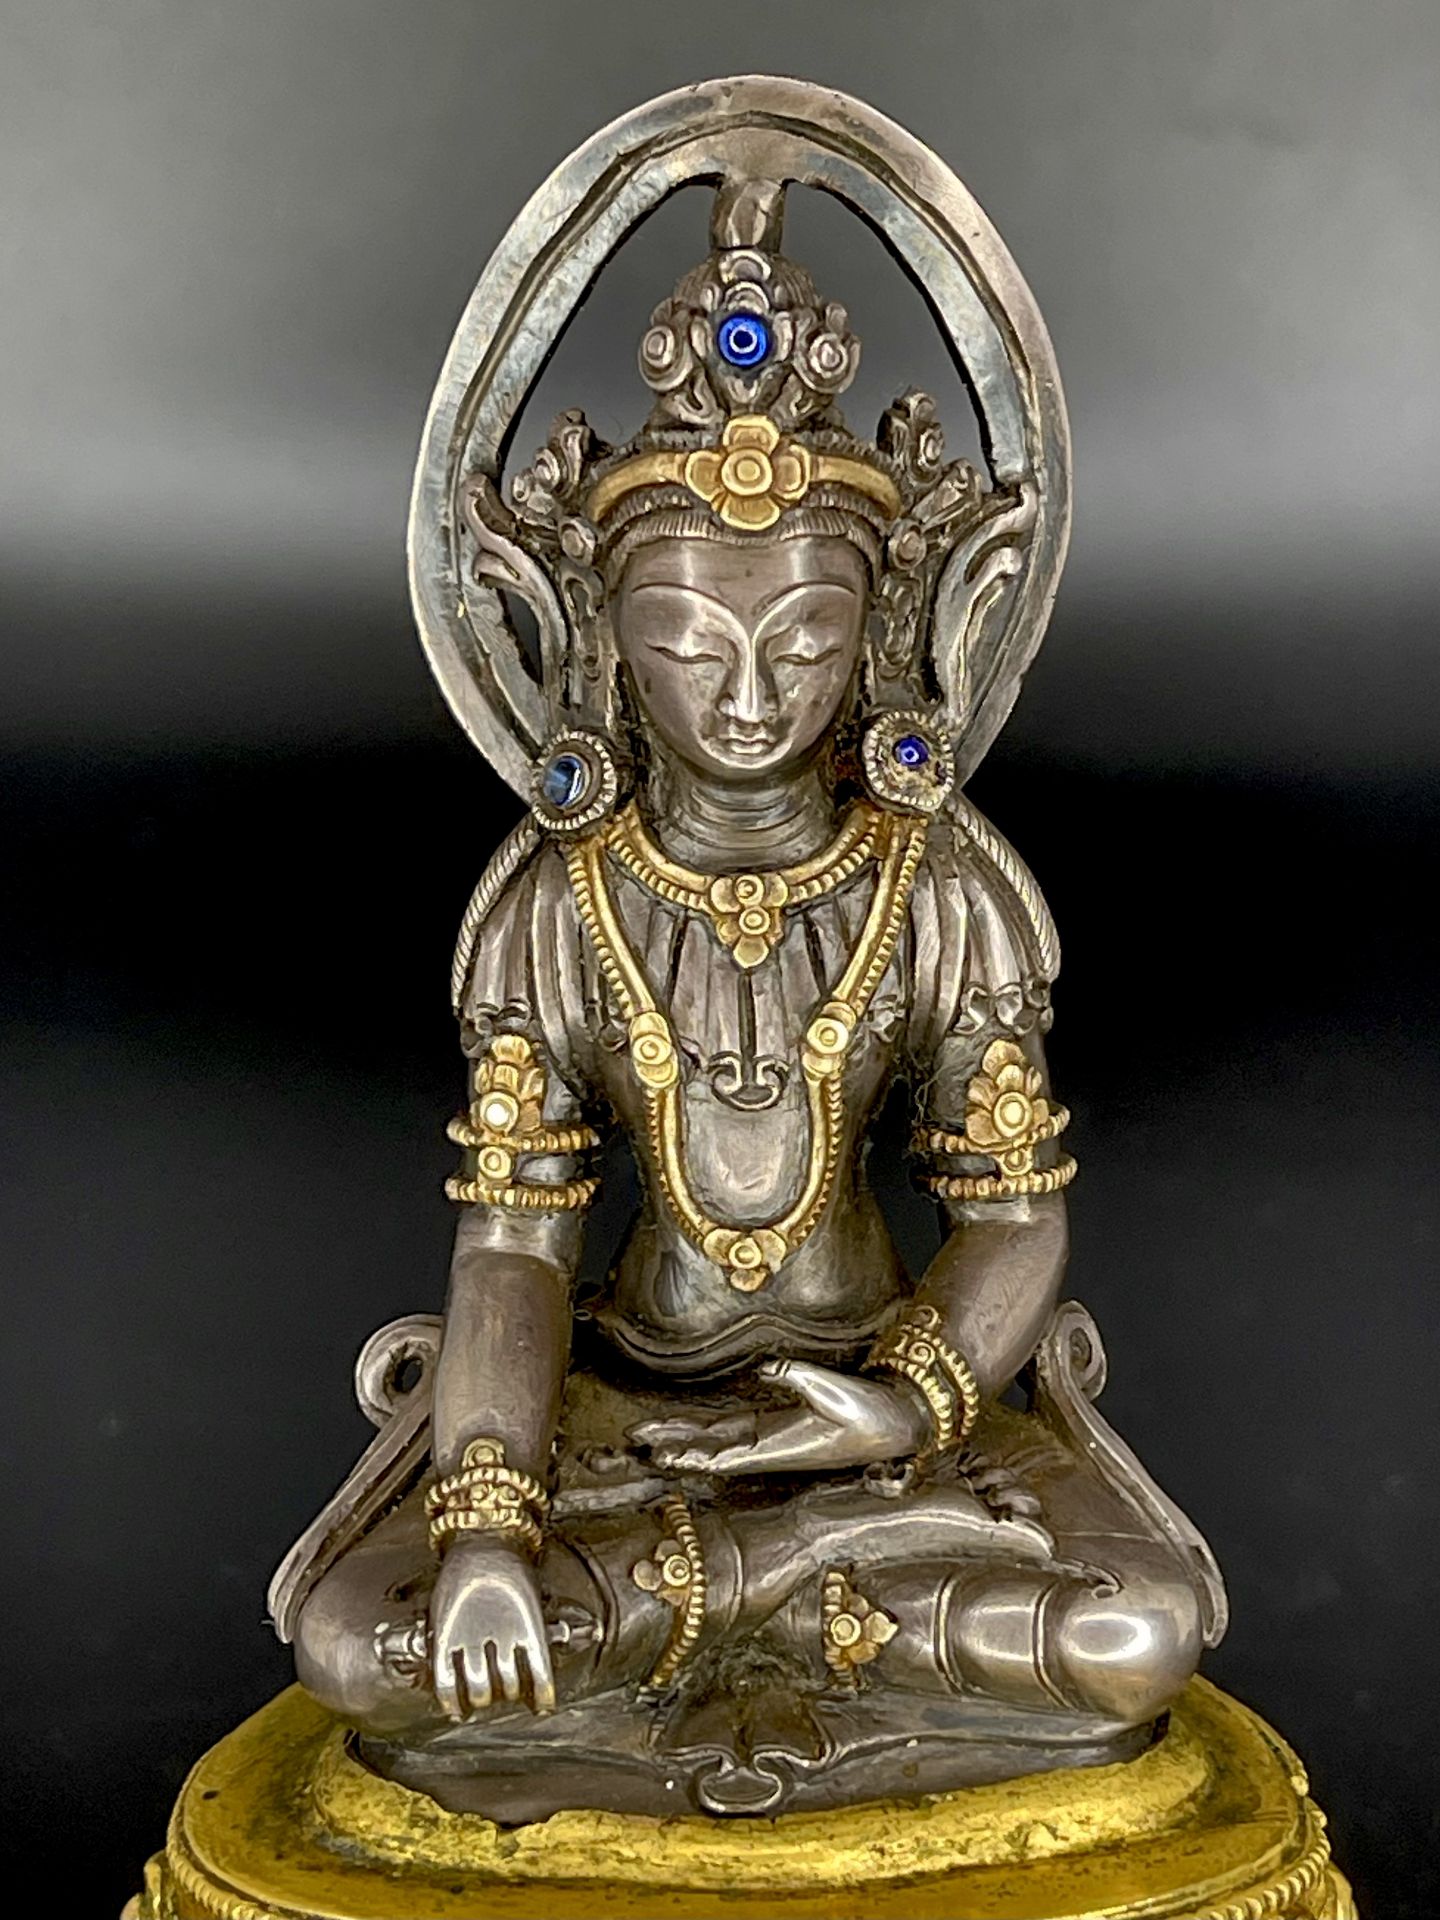 A 17th-century seated Buddha statue - Image 6 of 13